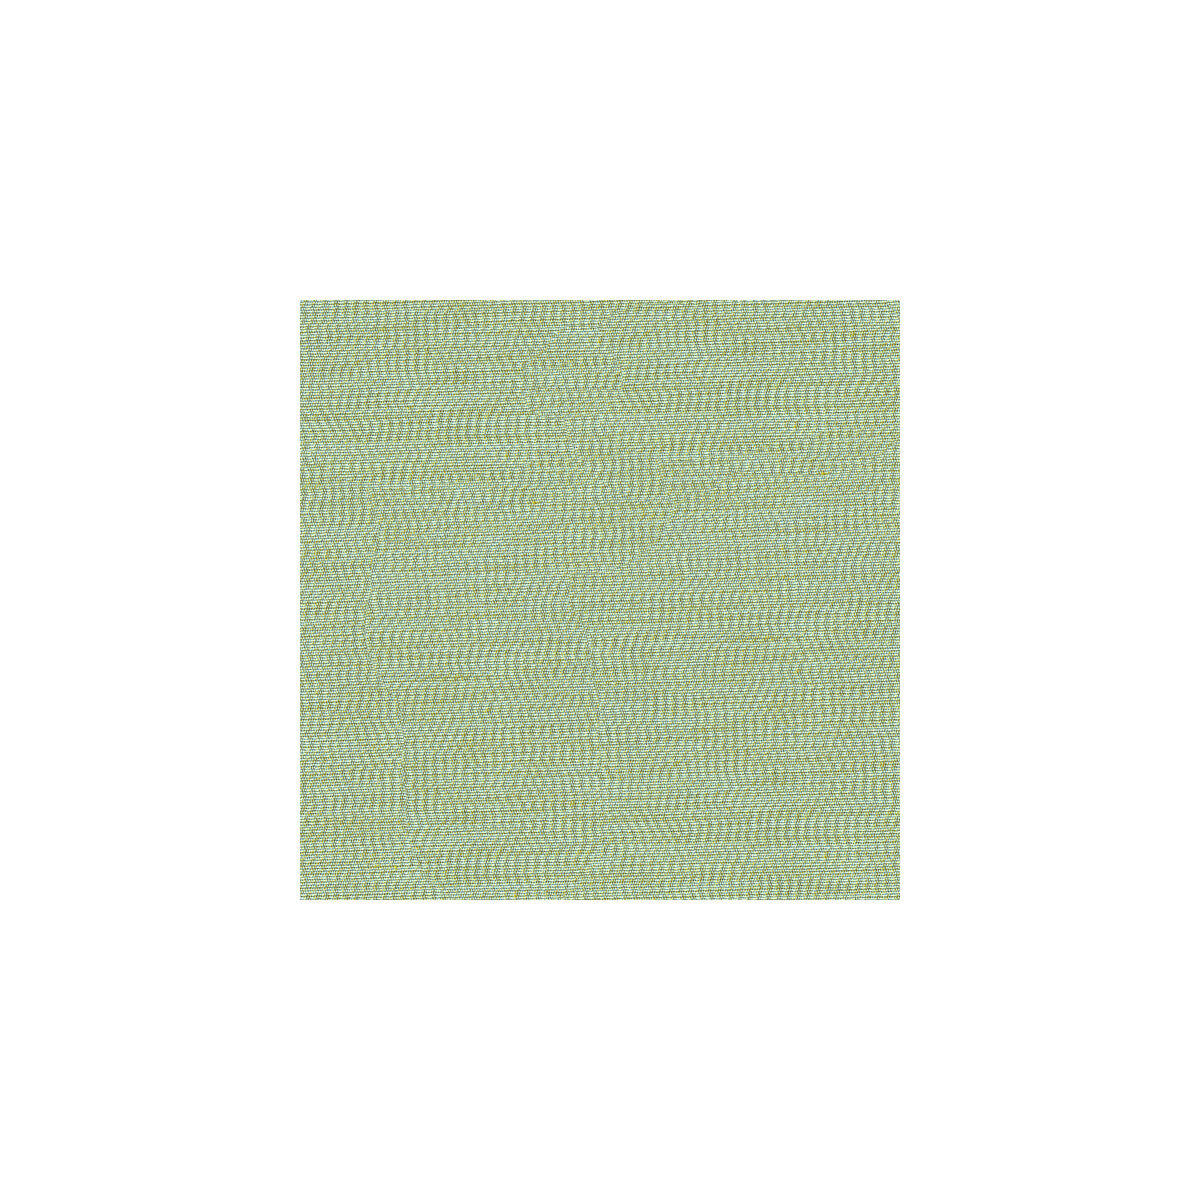 Kravet Basics fabric in 33136-135 color - pattern 33136.135.0 - by Kravet Basics in the Echo Heirloom India collection